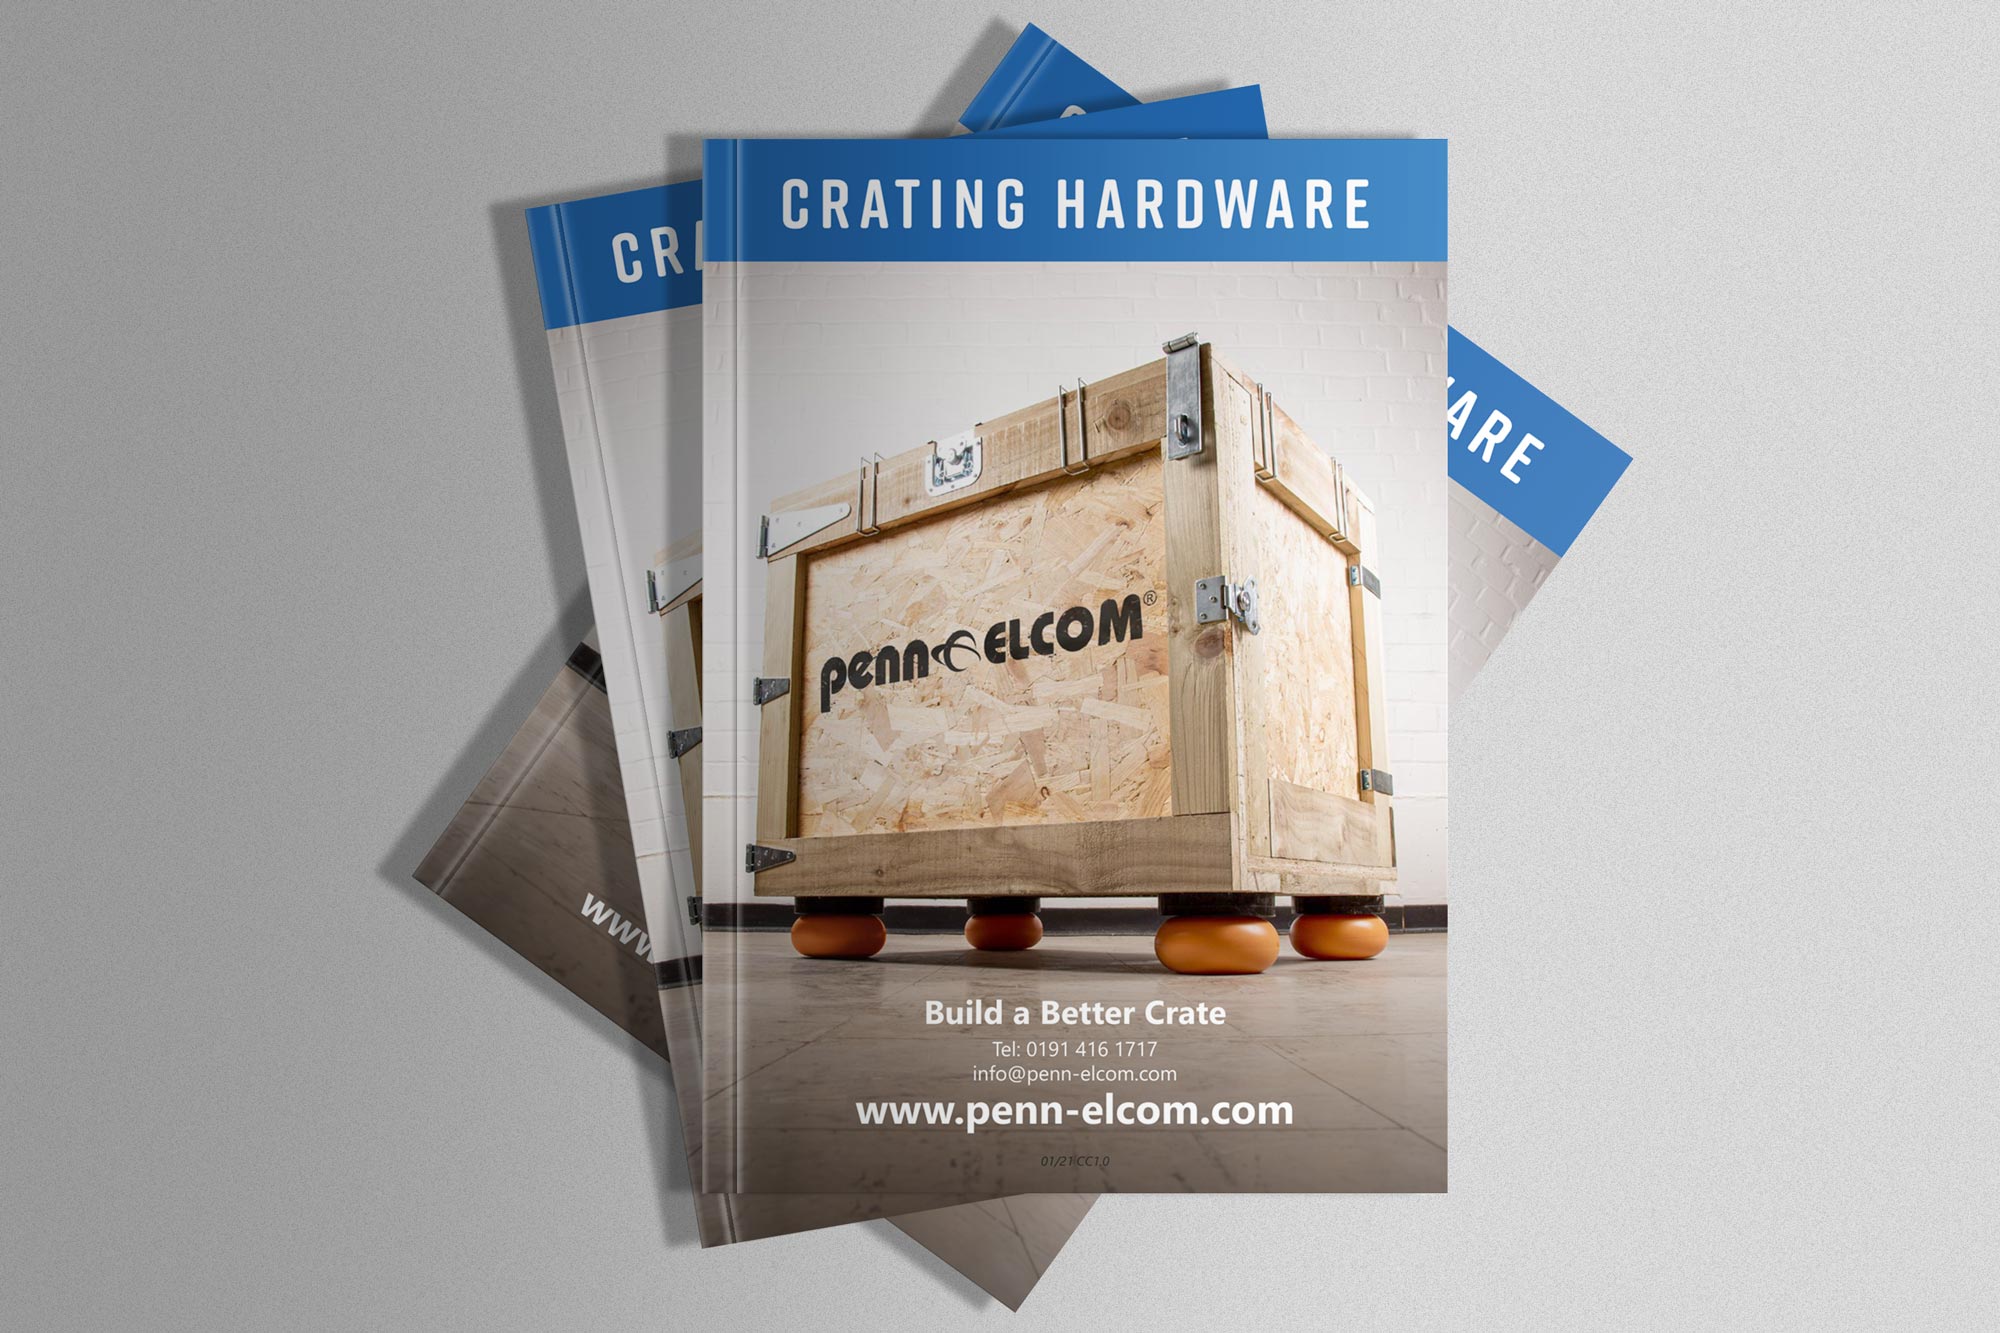 Our Crating Catalogue is a one-stop-shop for your crating hardware needs